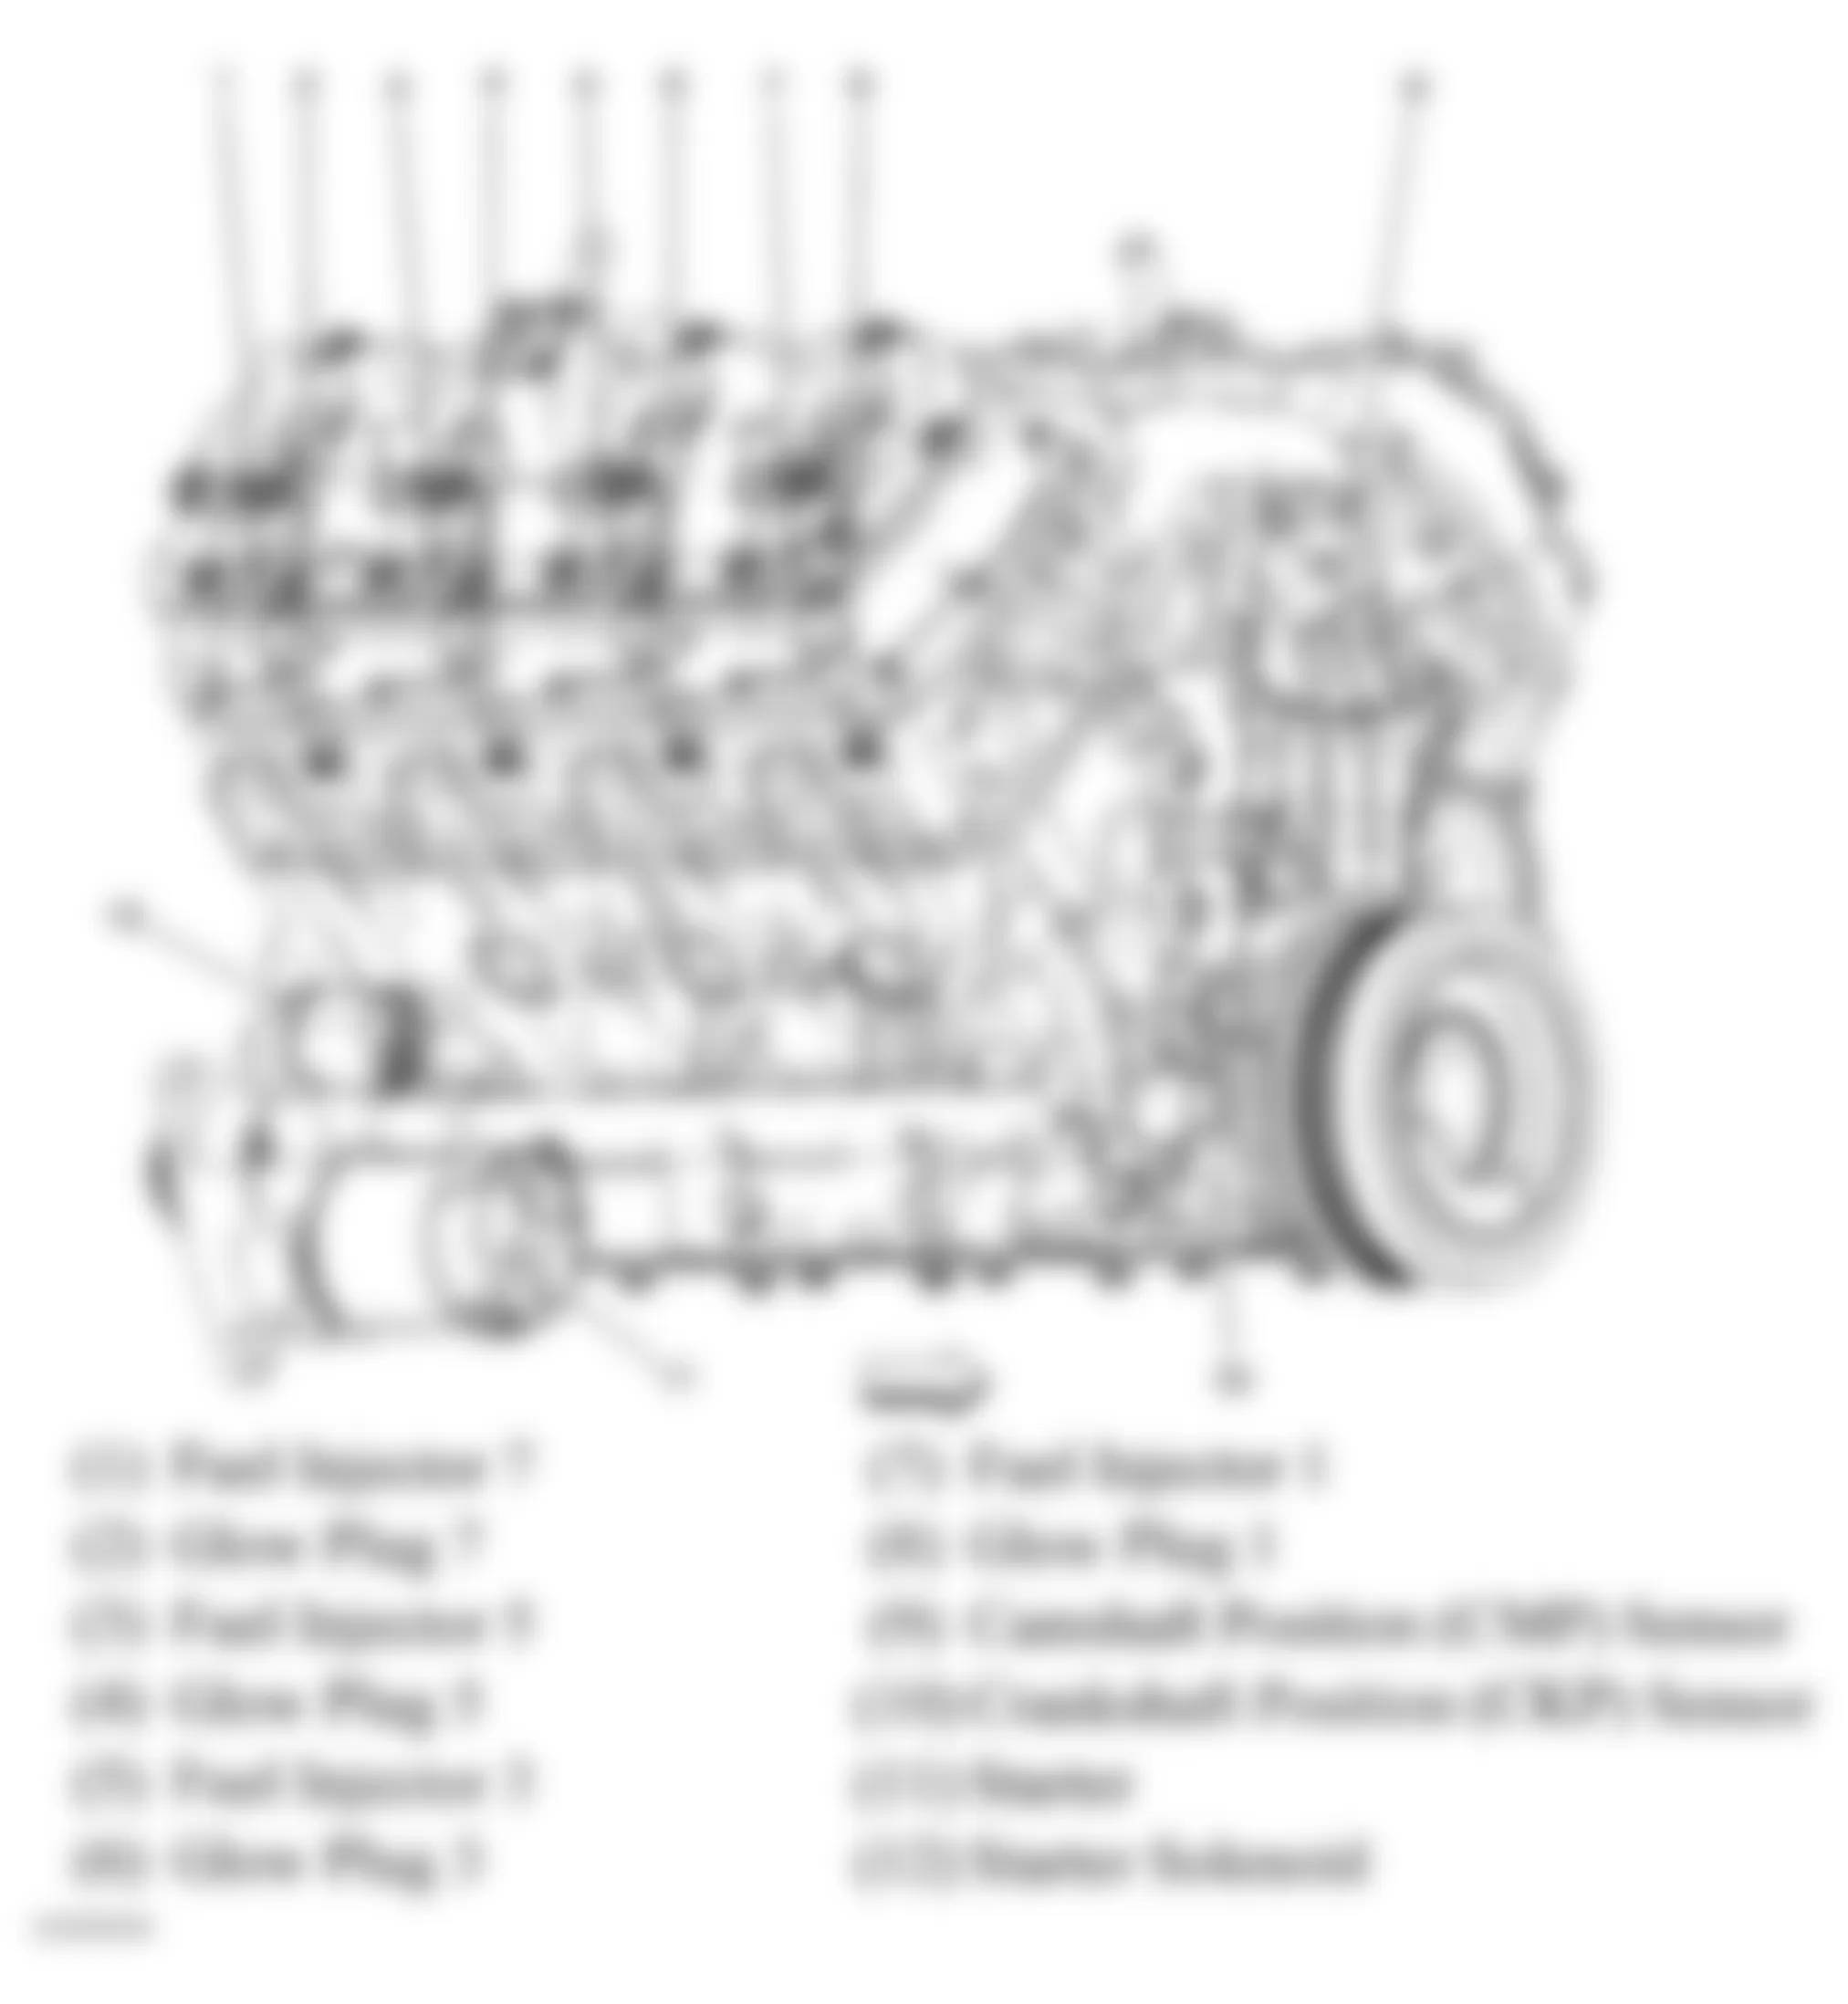 GMC Savana G2500 2009 - Component Locations -  Right Side Of Engine (6.6L)